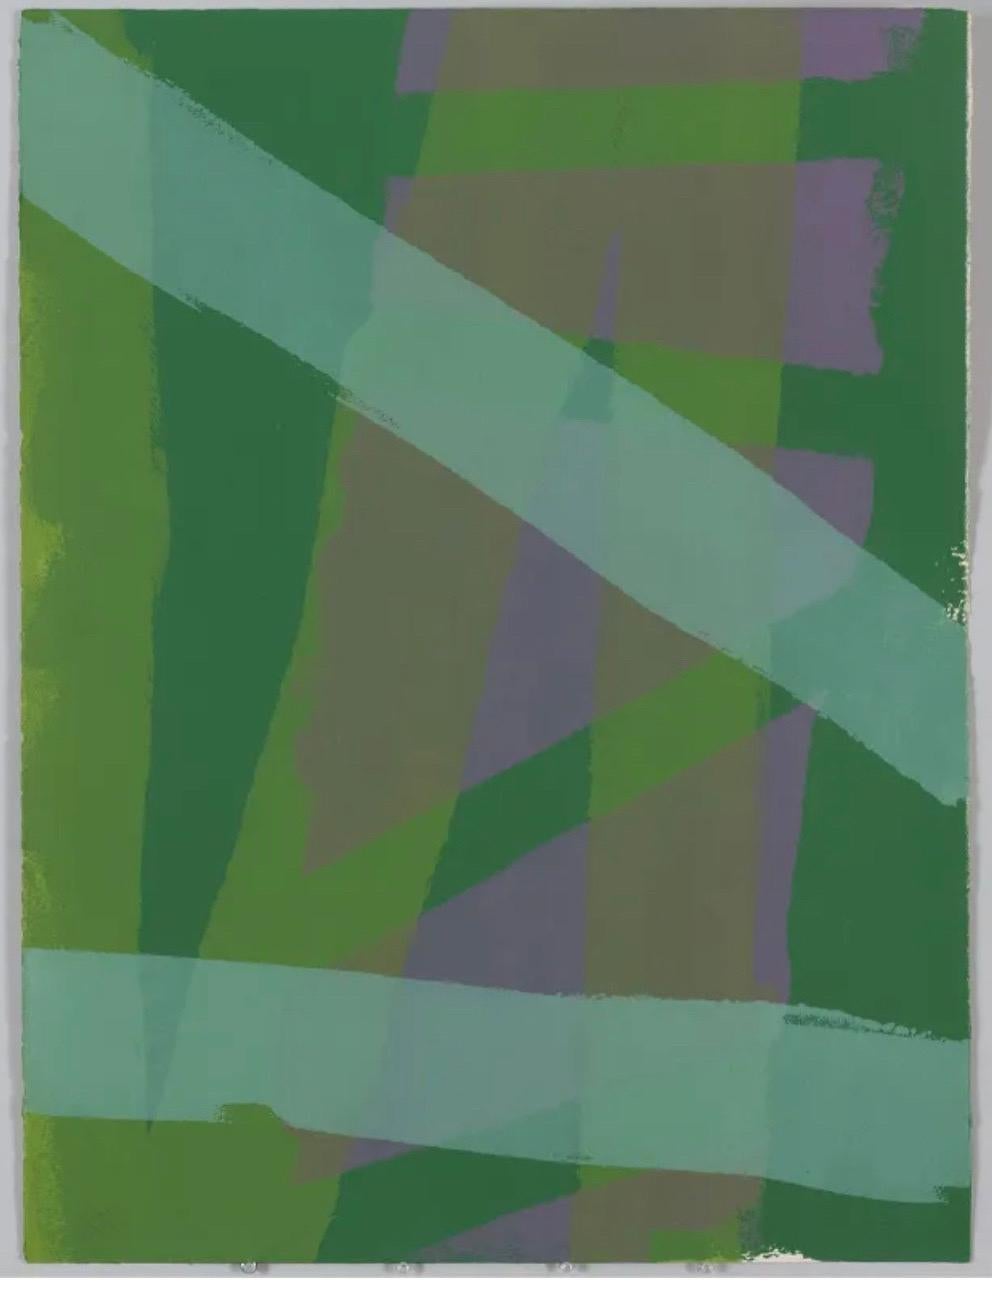 Edward Avedisian (1936-2007) 
Green Gold, 1969
Lithograph in color on Arches wove paper.
Hand signed, dated and numbered in pencil.
Edition 100

Dimensions:
22.25 inches X 30.25 inches 
unframed

Provenance: Brooke Alexander Gallery, NY

Edward